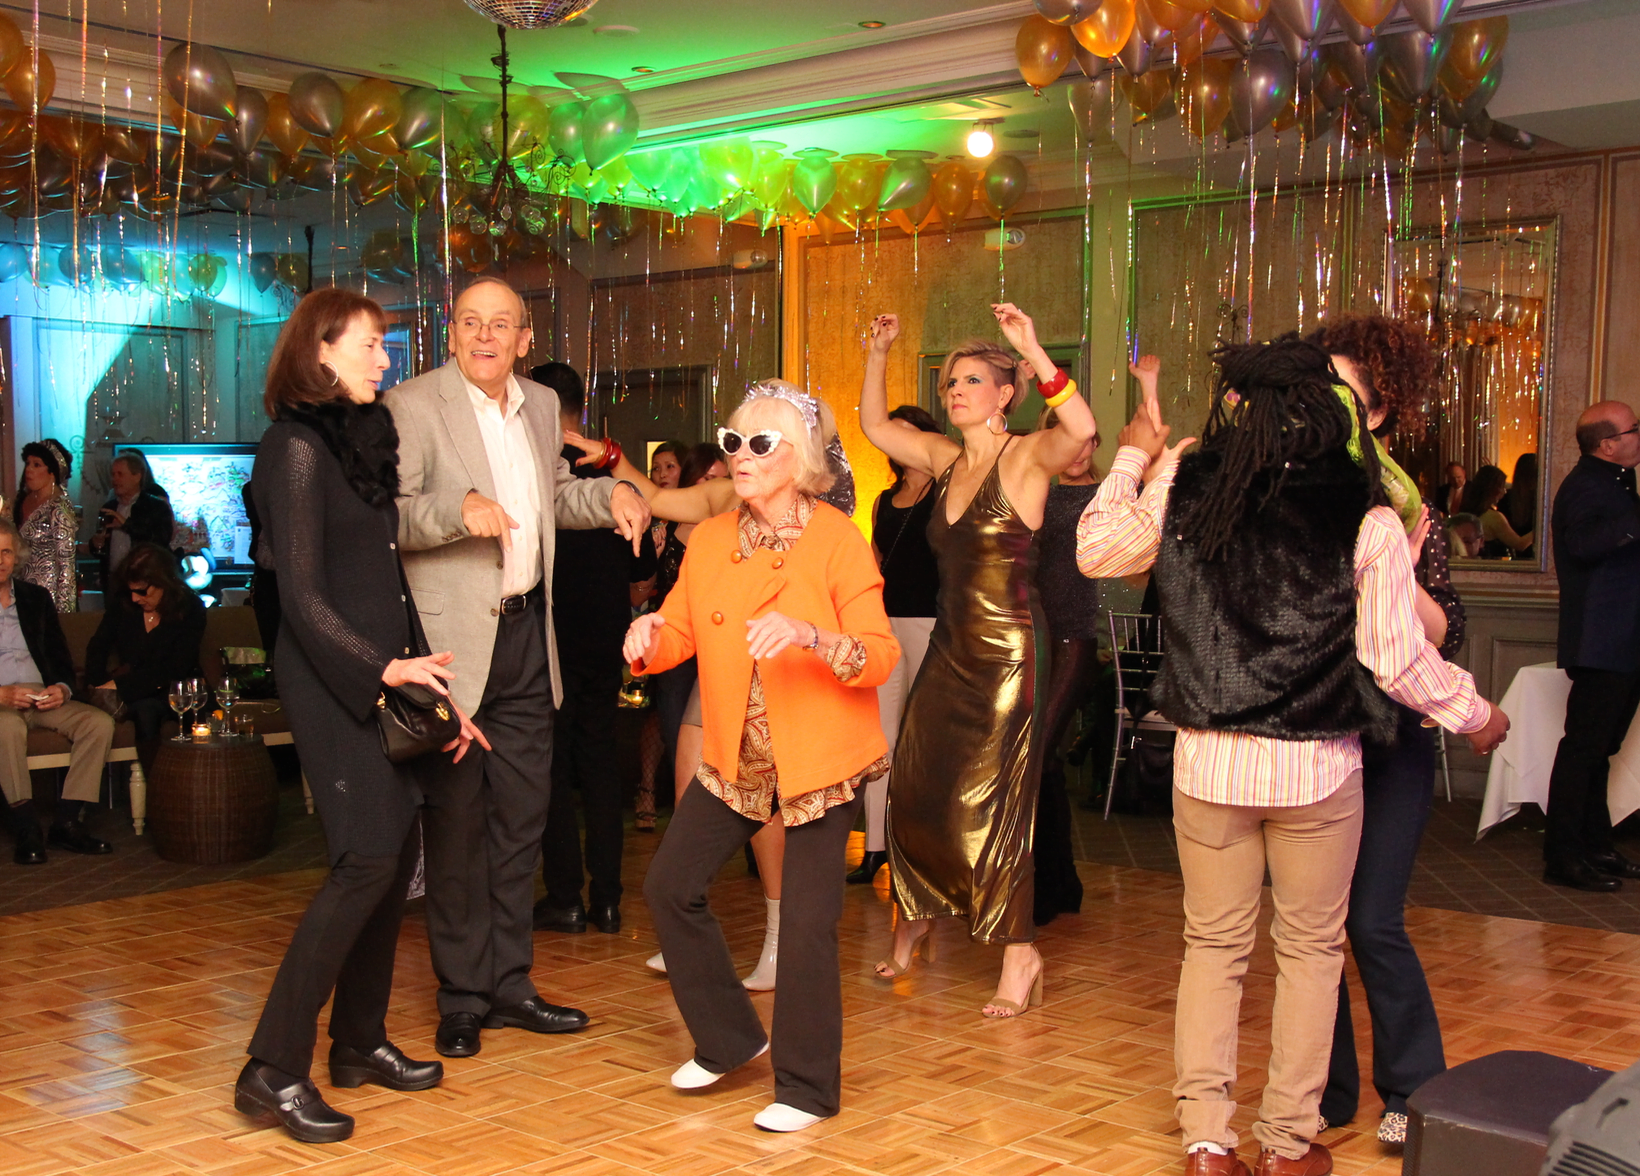 In a benefit for Adopt a Dog, Carriage House Motor Cars recreated a 70s disco in the theme of Studio 54 at L'escale Restaurant. Dec 2, 2017 Photo: Leslie Yager